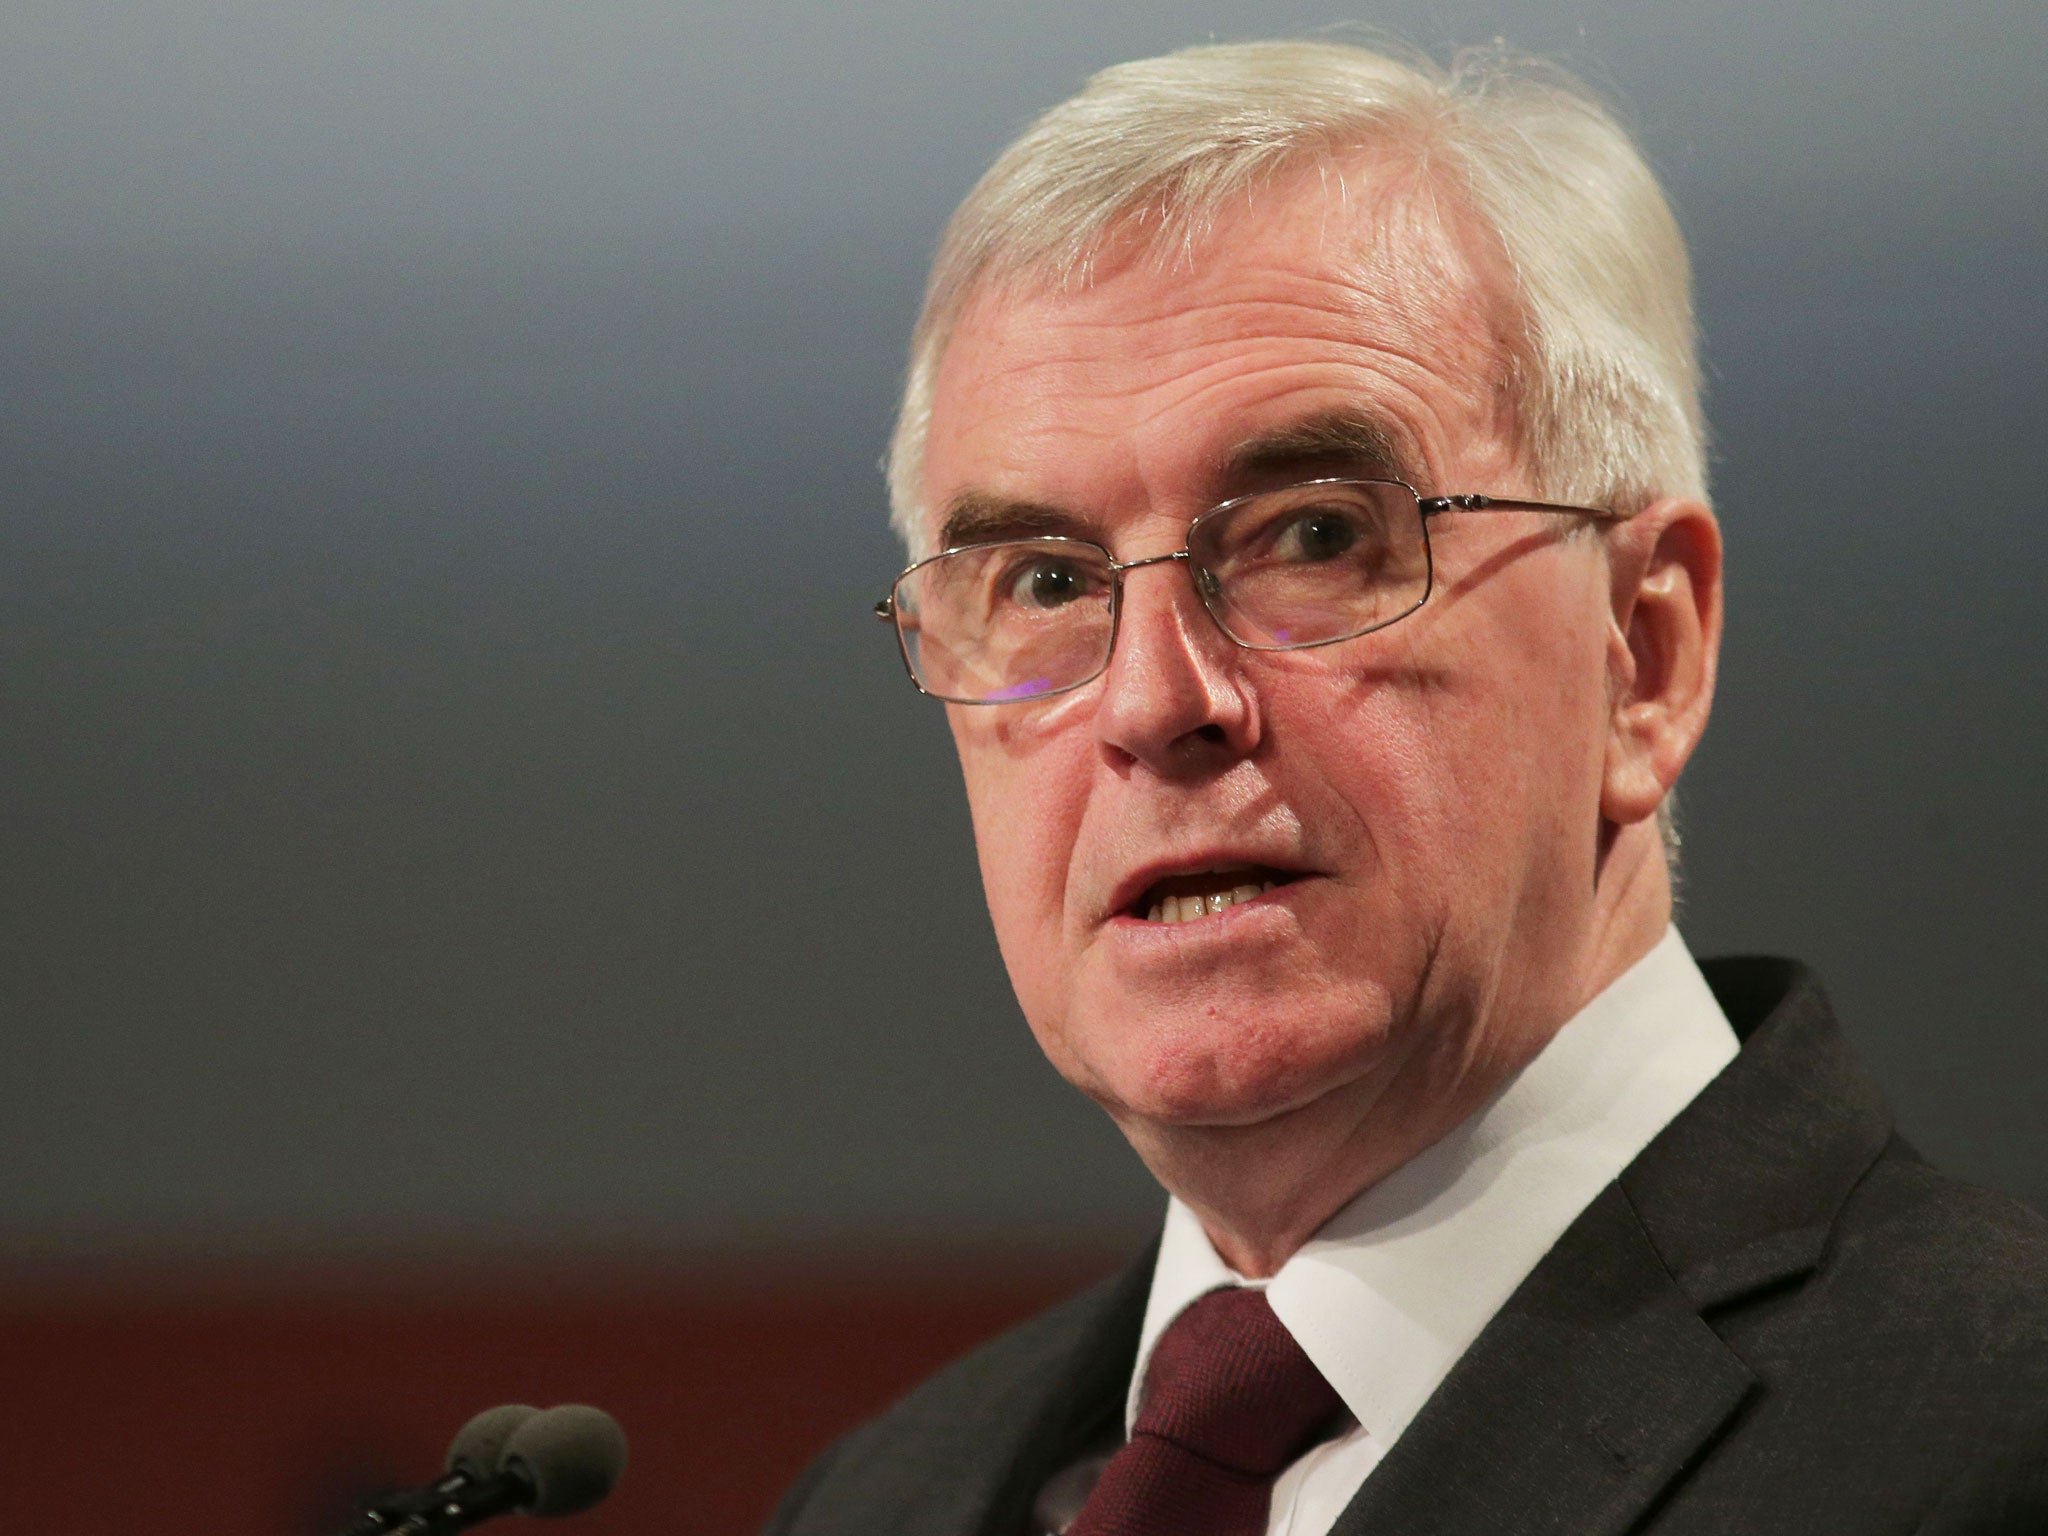 Shadow Chancellor of the Exchequer John McDonnell speaks at the British Chambers of Commerce conference in London